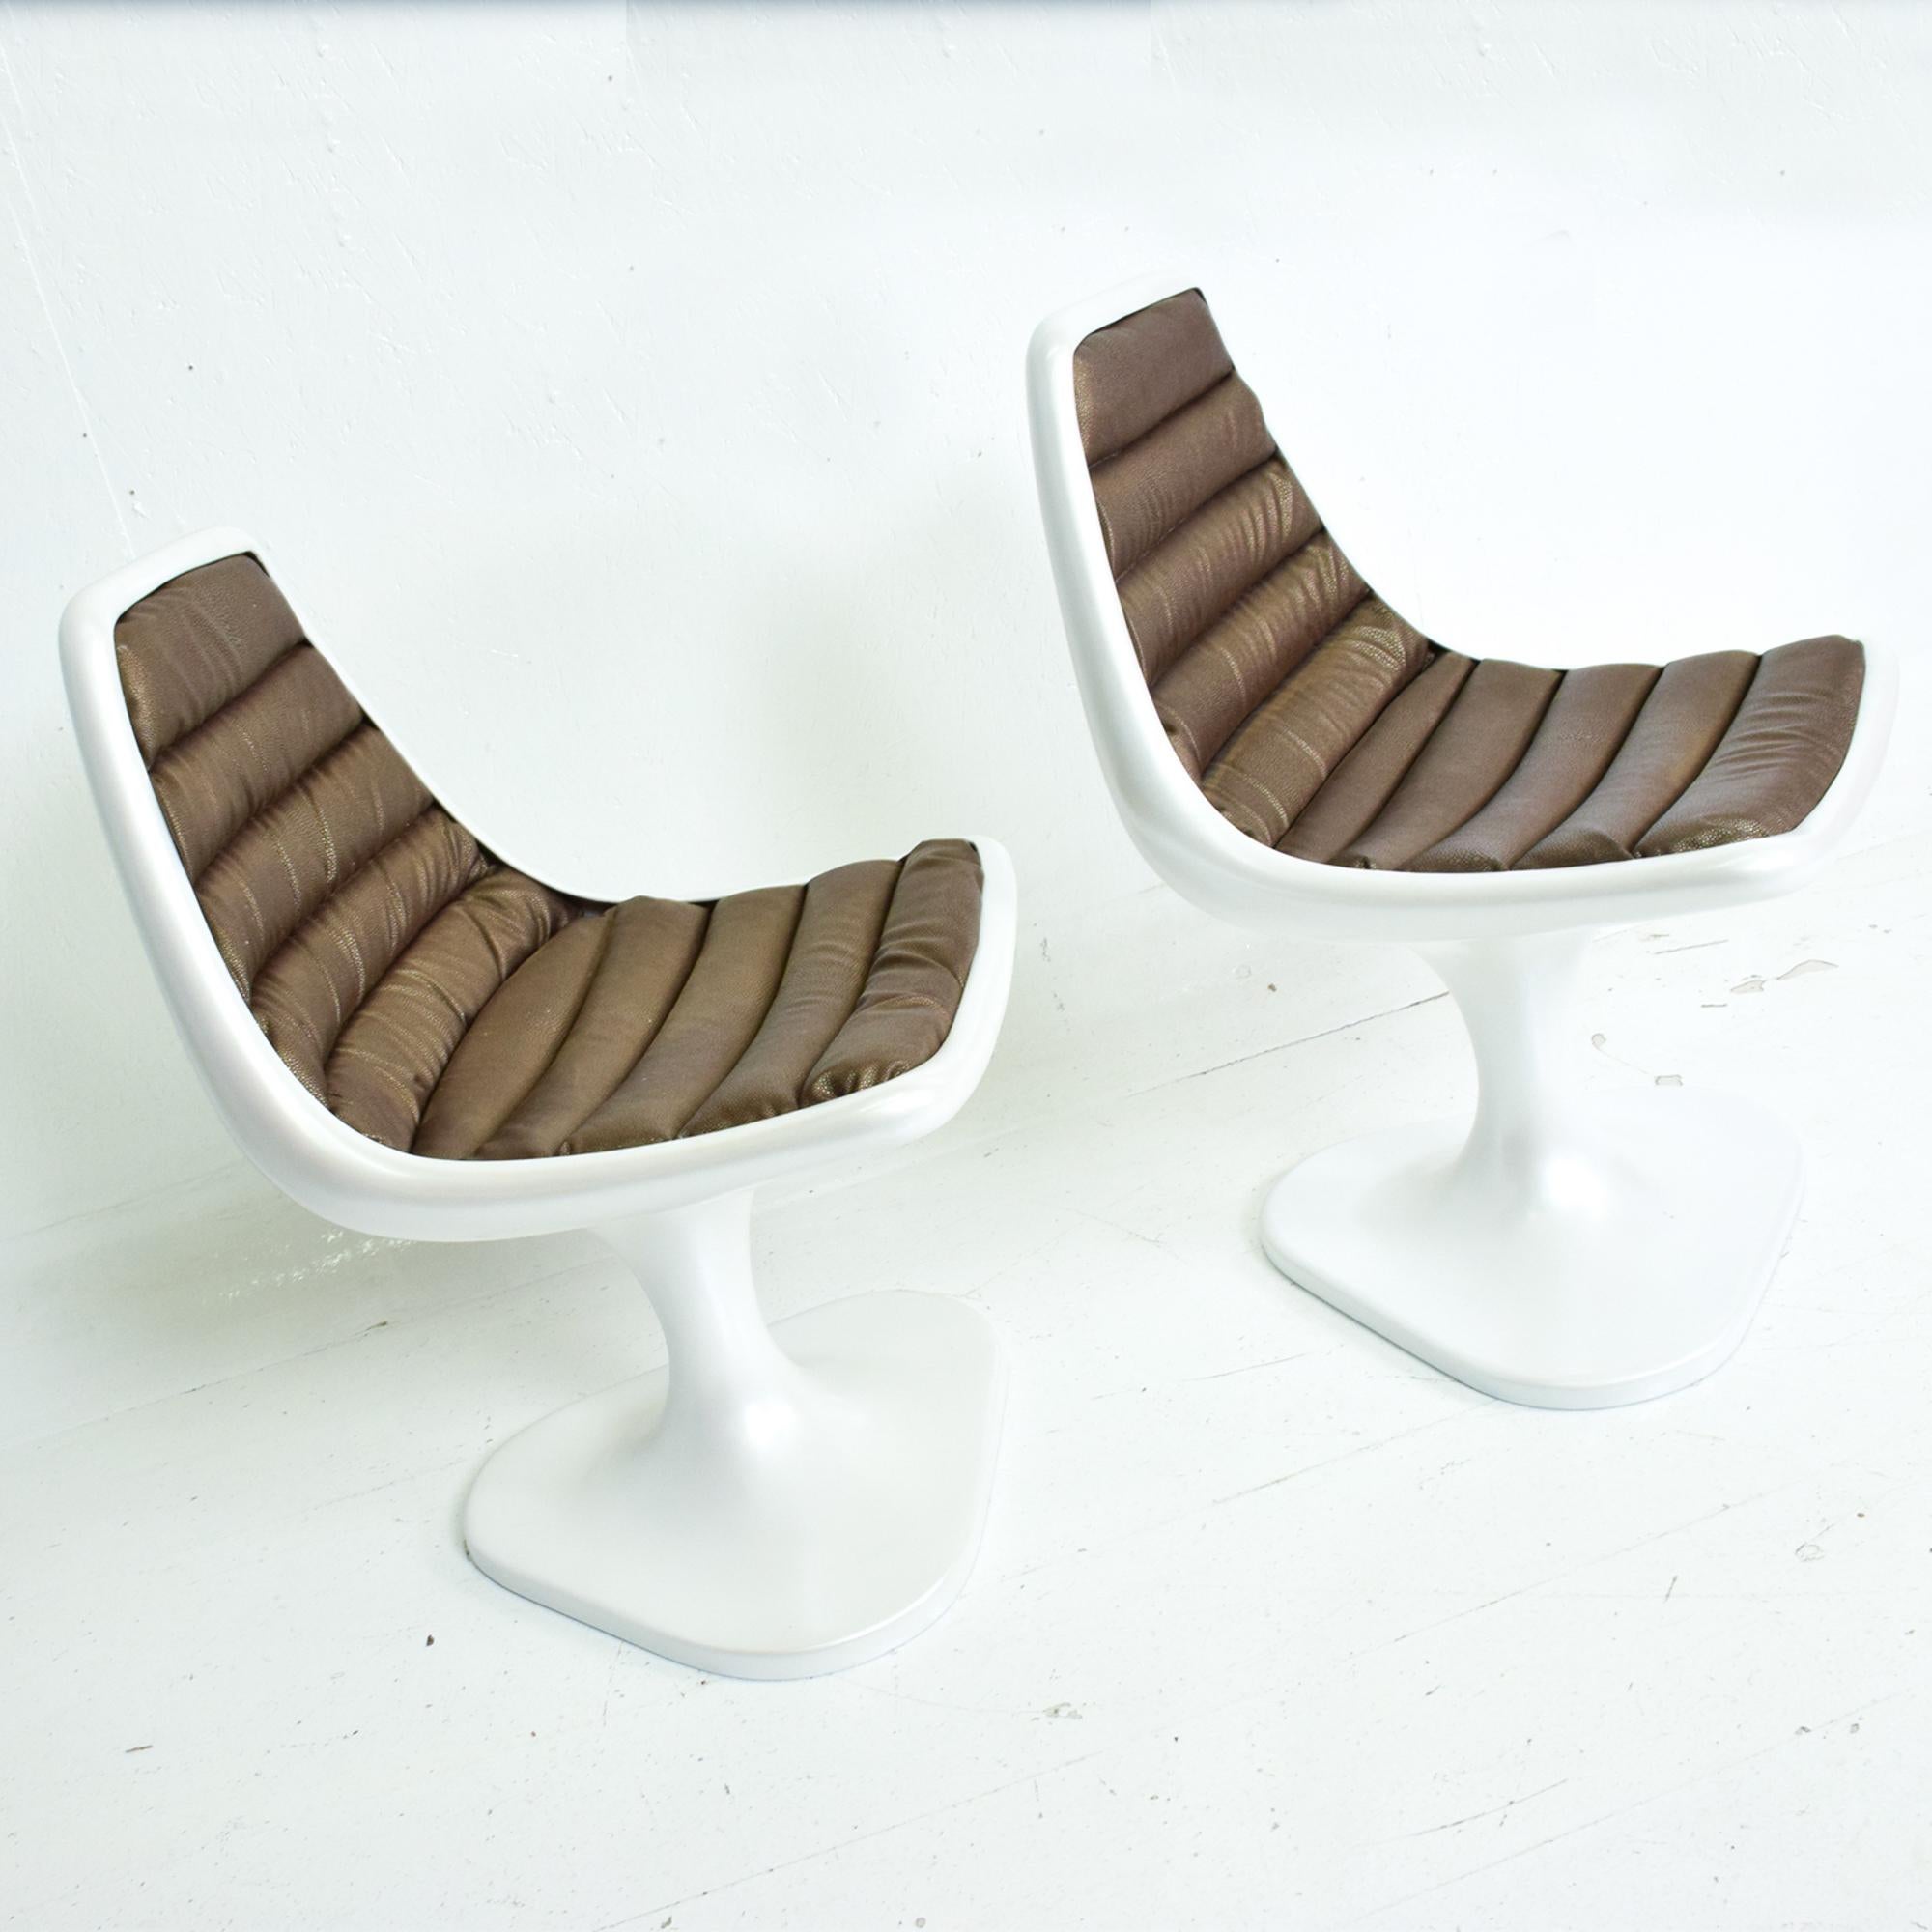 For your consideration: Sculptural atomic Mid-Century Modern exceptional pair of side chairs in fiberglass.
Made in Mexico, circa 1970s.
Sculptural shape in the manner of designer Eero Saarinen.
White pearl color with brown faux